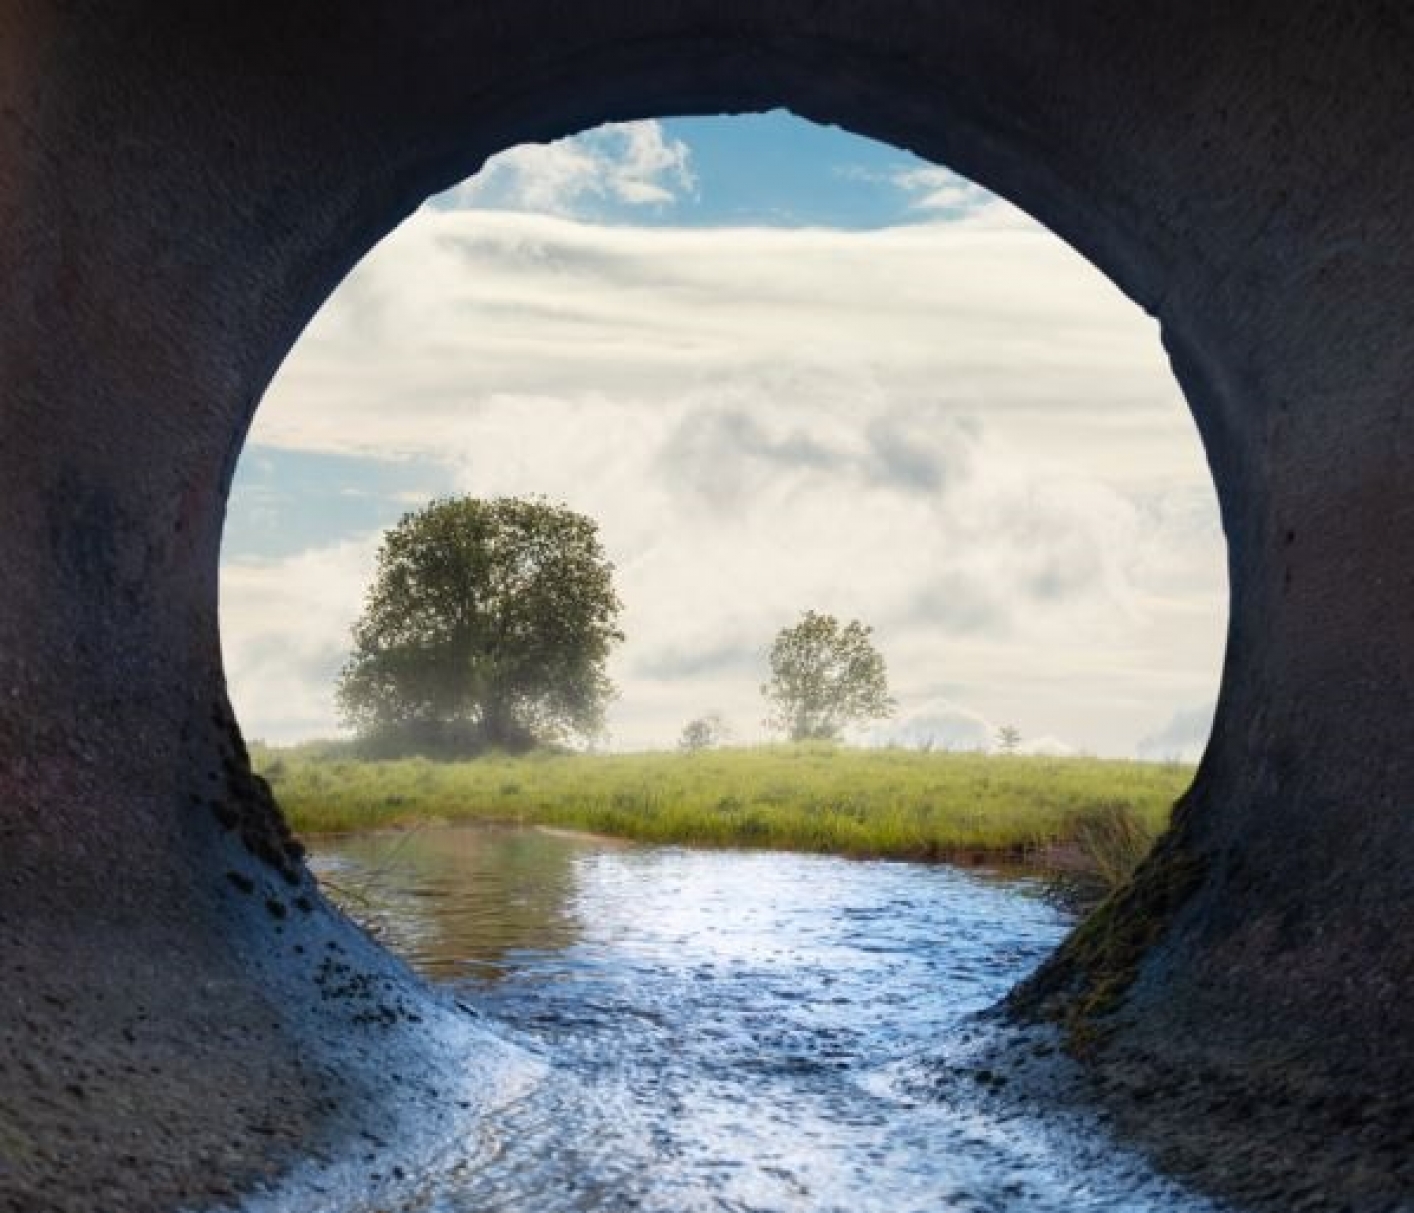 Vista of nature, seen through a water drainage pipe